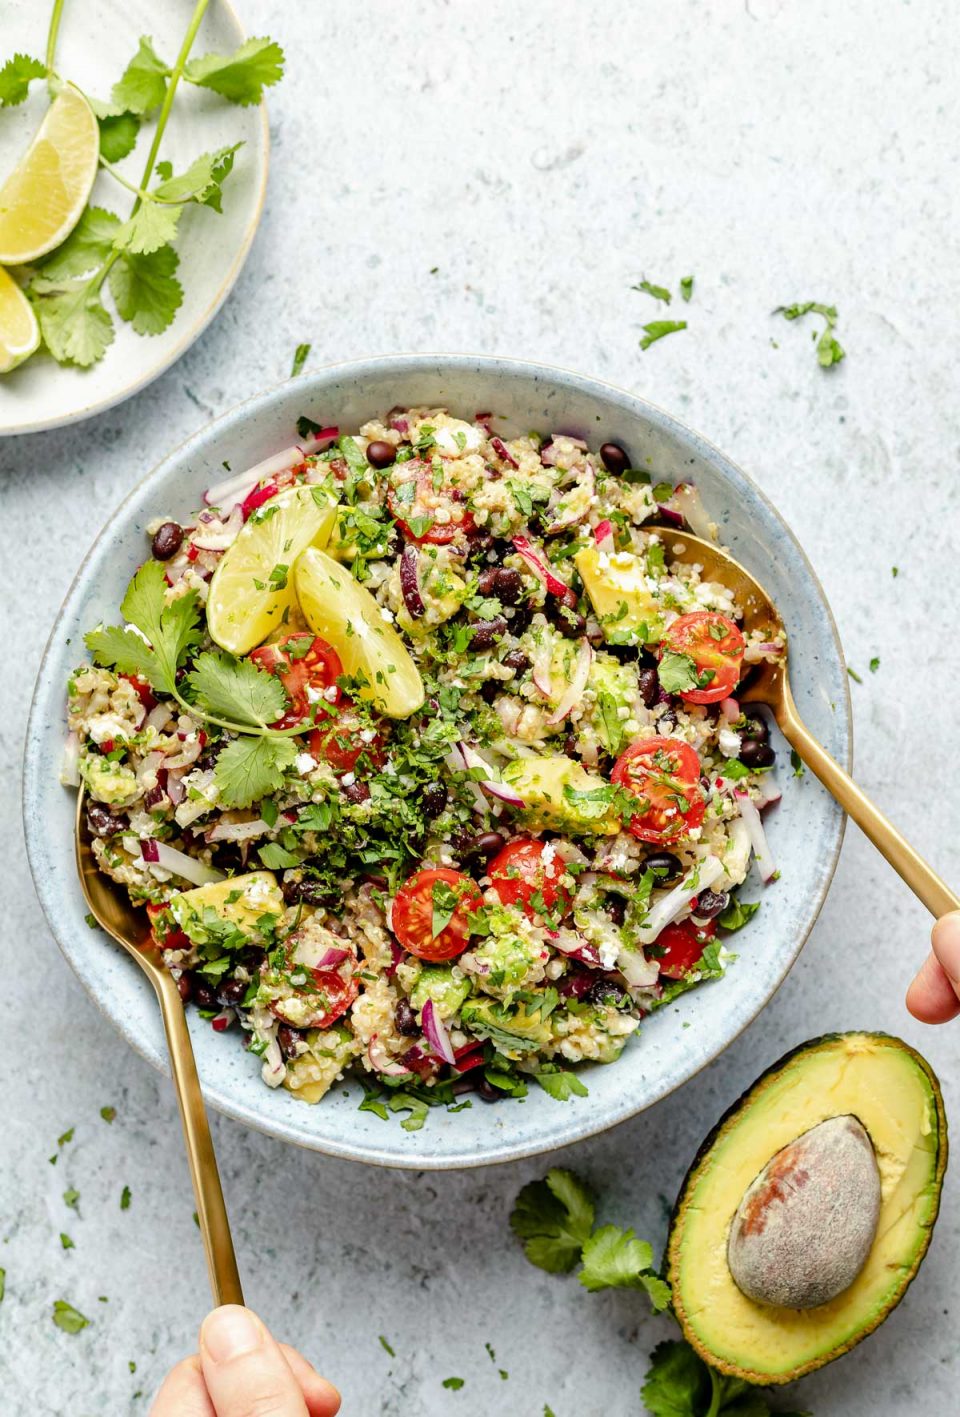 Close up of Southwest quinoa salad shown in light blue serving bowl, topped with fresh cilantro & lime wedges. A woman's hands are shown holding gold flatware, serving the salad. The bowl sits atop a light blue surface, surrounded by chopped cilantro, lime wedges, & halved avocado.